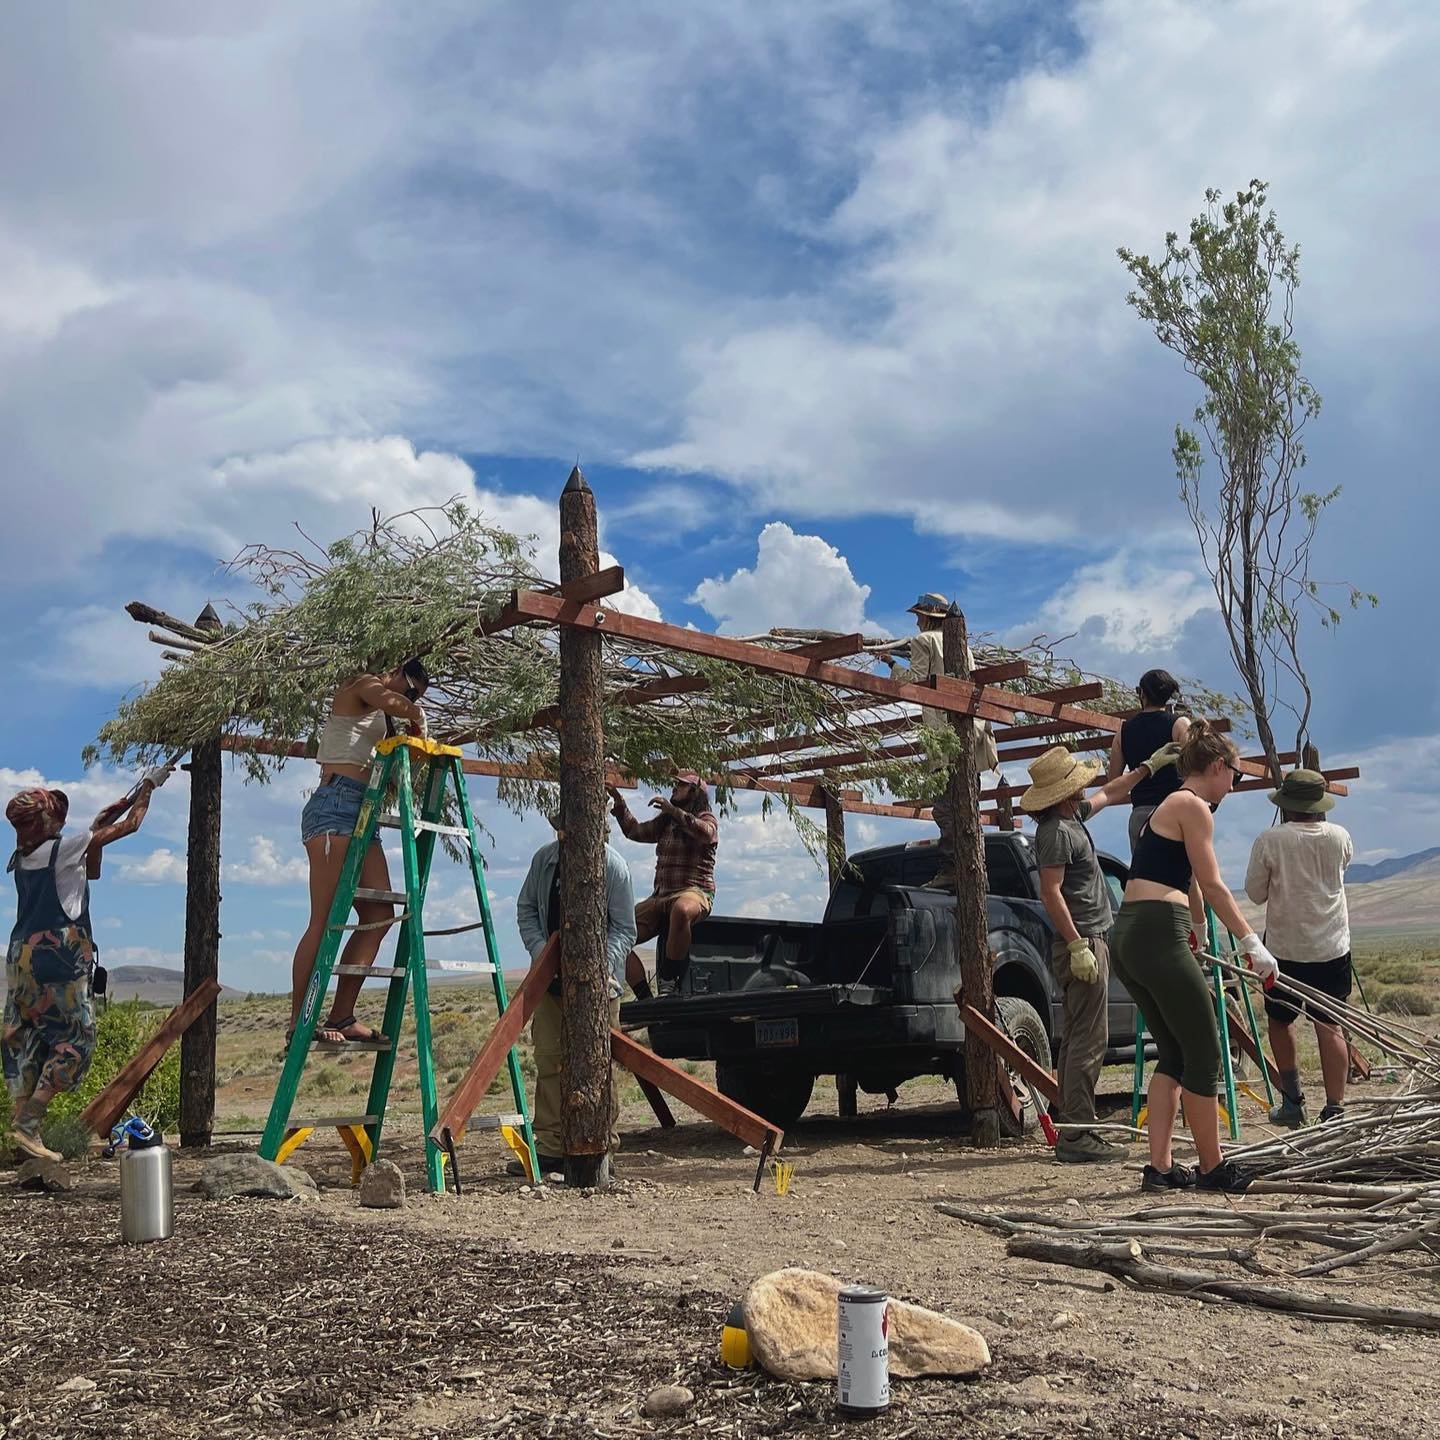 With summer right around the corner, The Ripple Project team is proud to announce our successful installation of a traditional Paiute shade structure, known as a &quot;haba,&quot; at the Pyramid Lake Museum! Habas provide shade during the summer mont